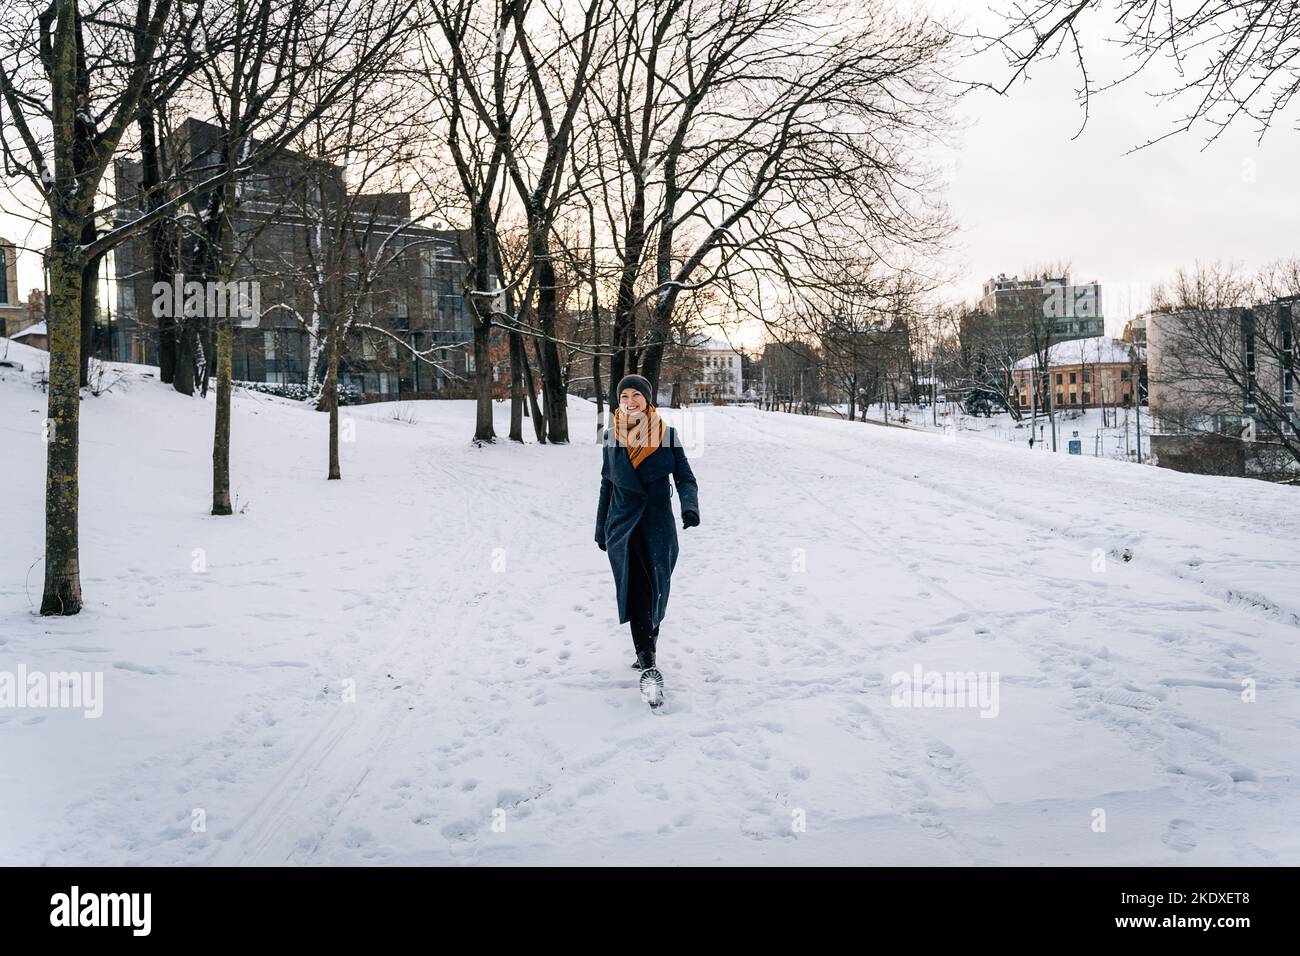 Wide viewing angle on a woman walking through a snowy winter city. Stock Photo